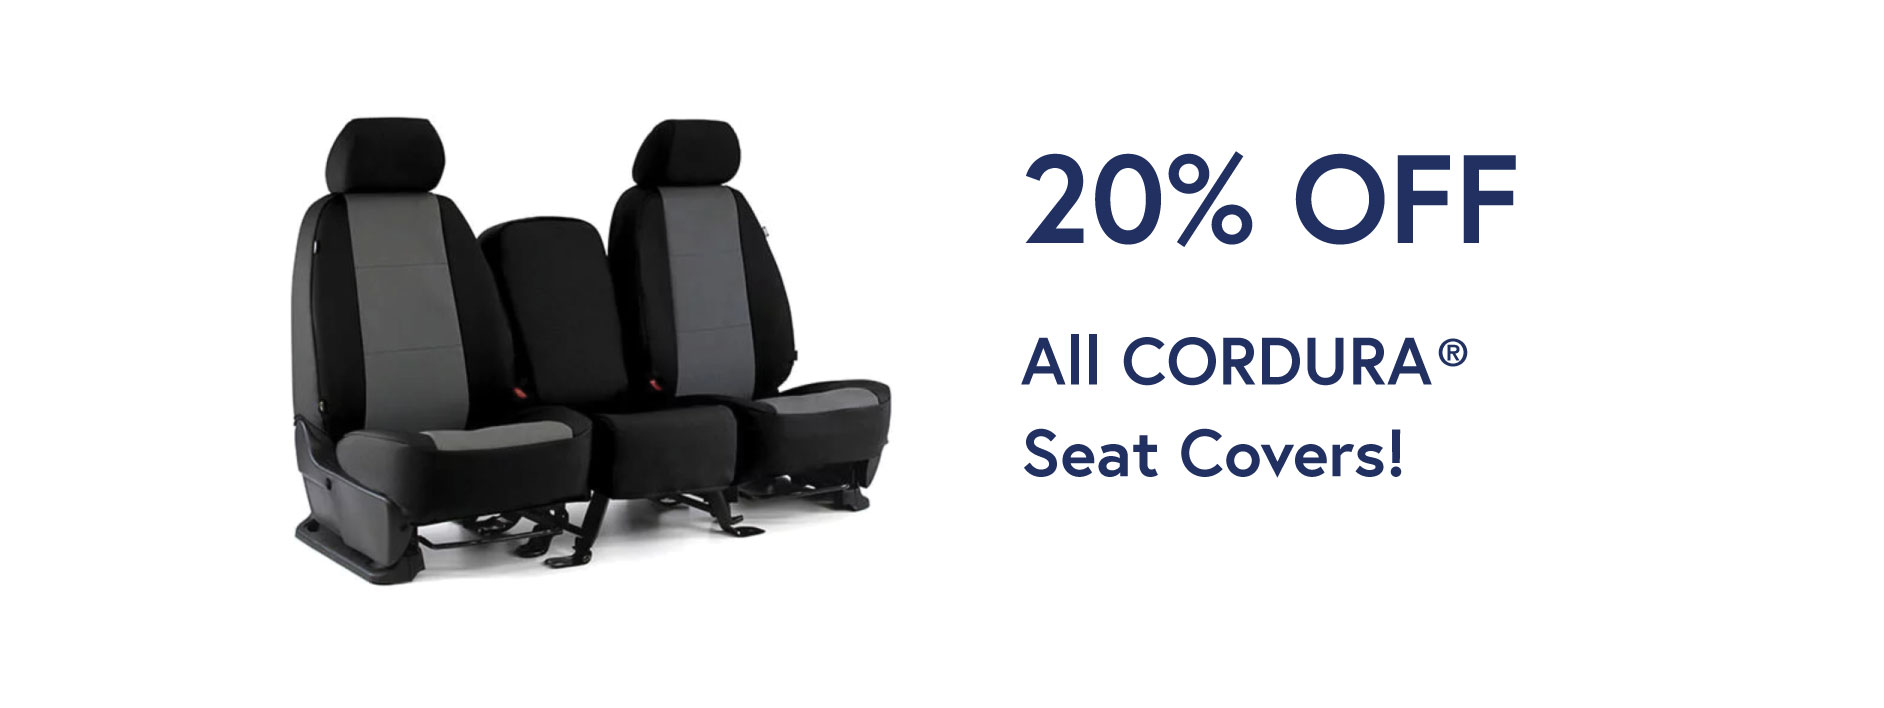 20% Off All Cordura Seat Covers!